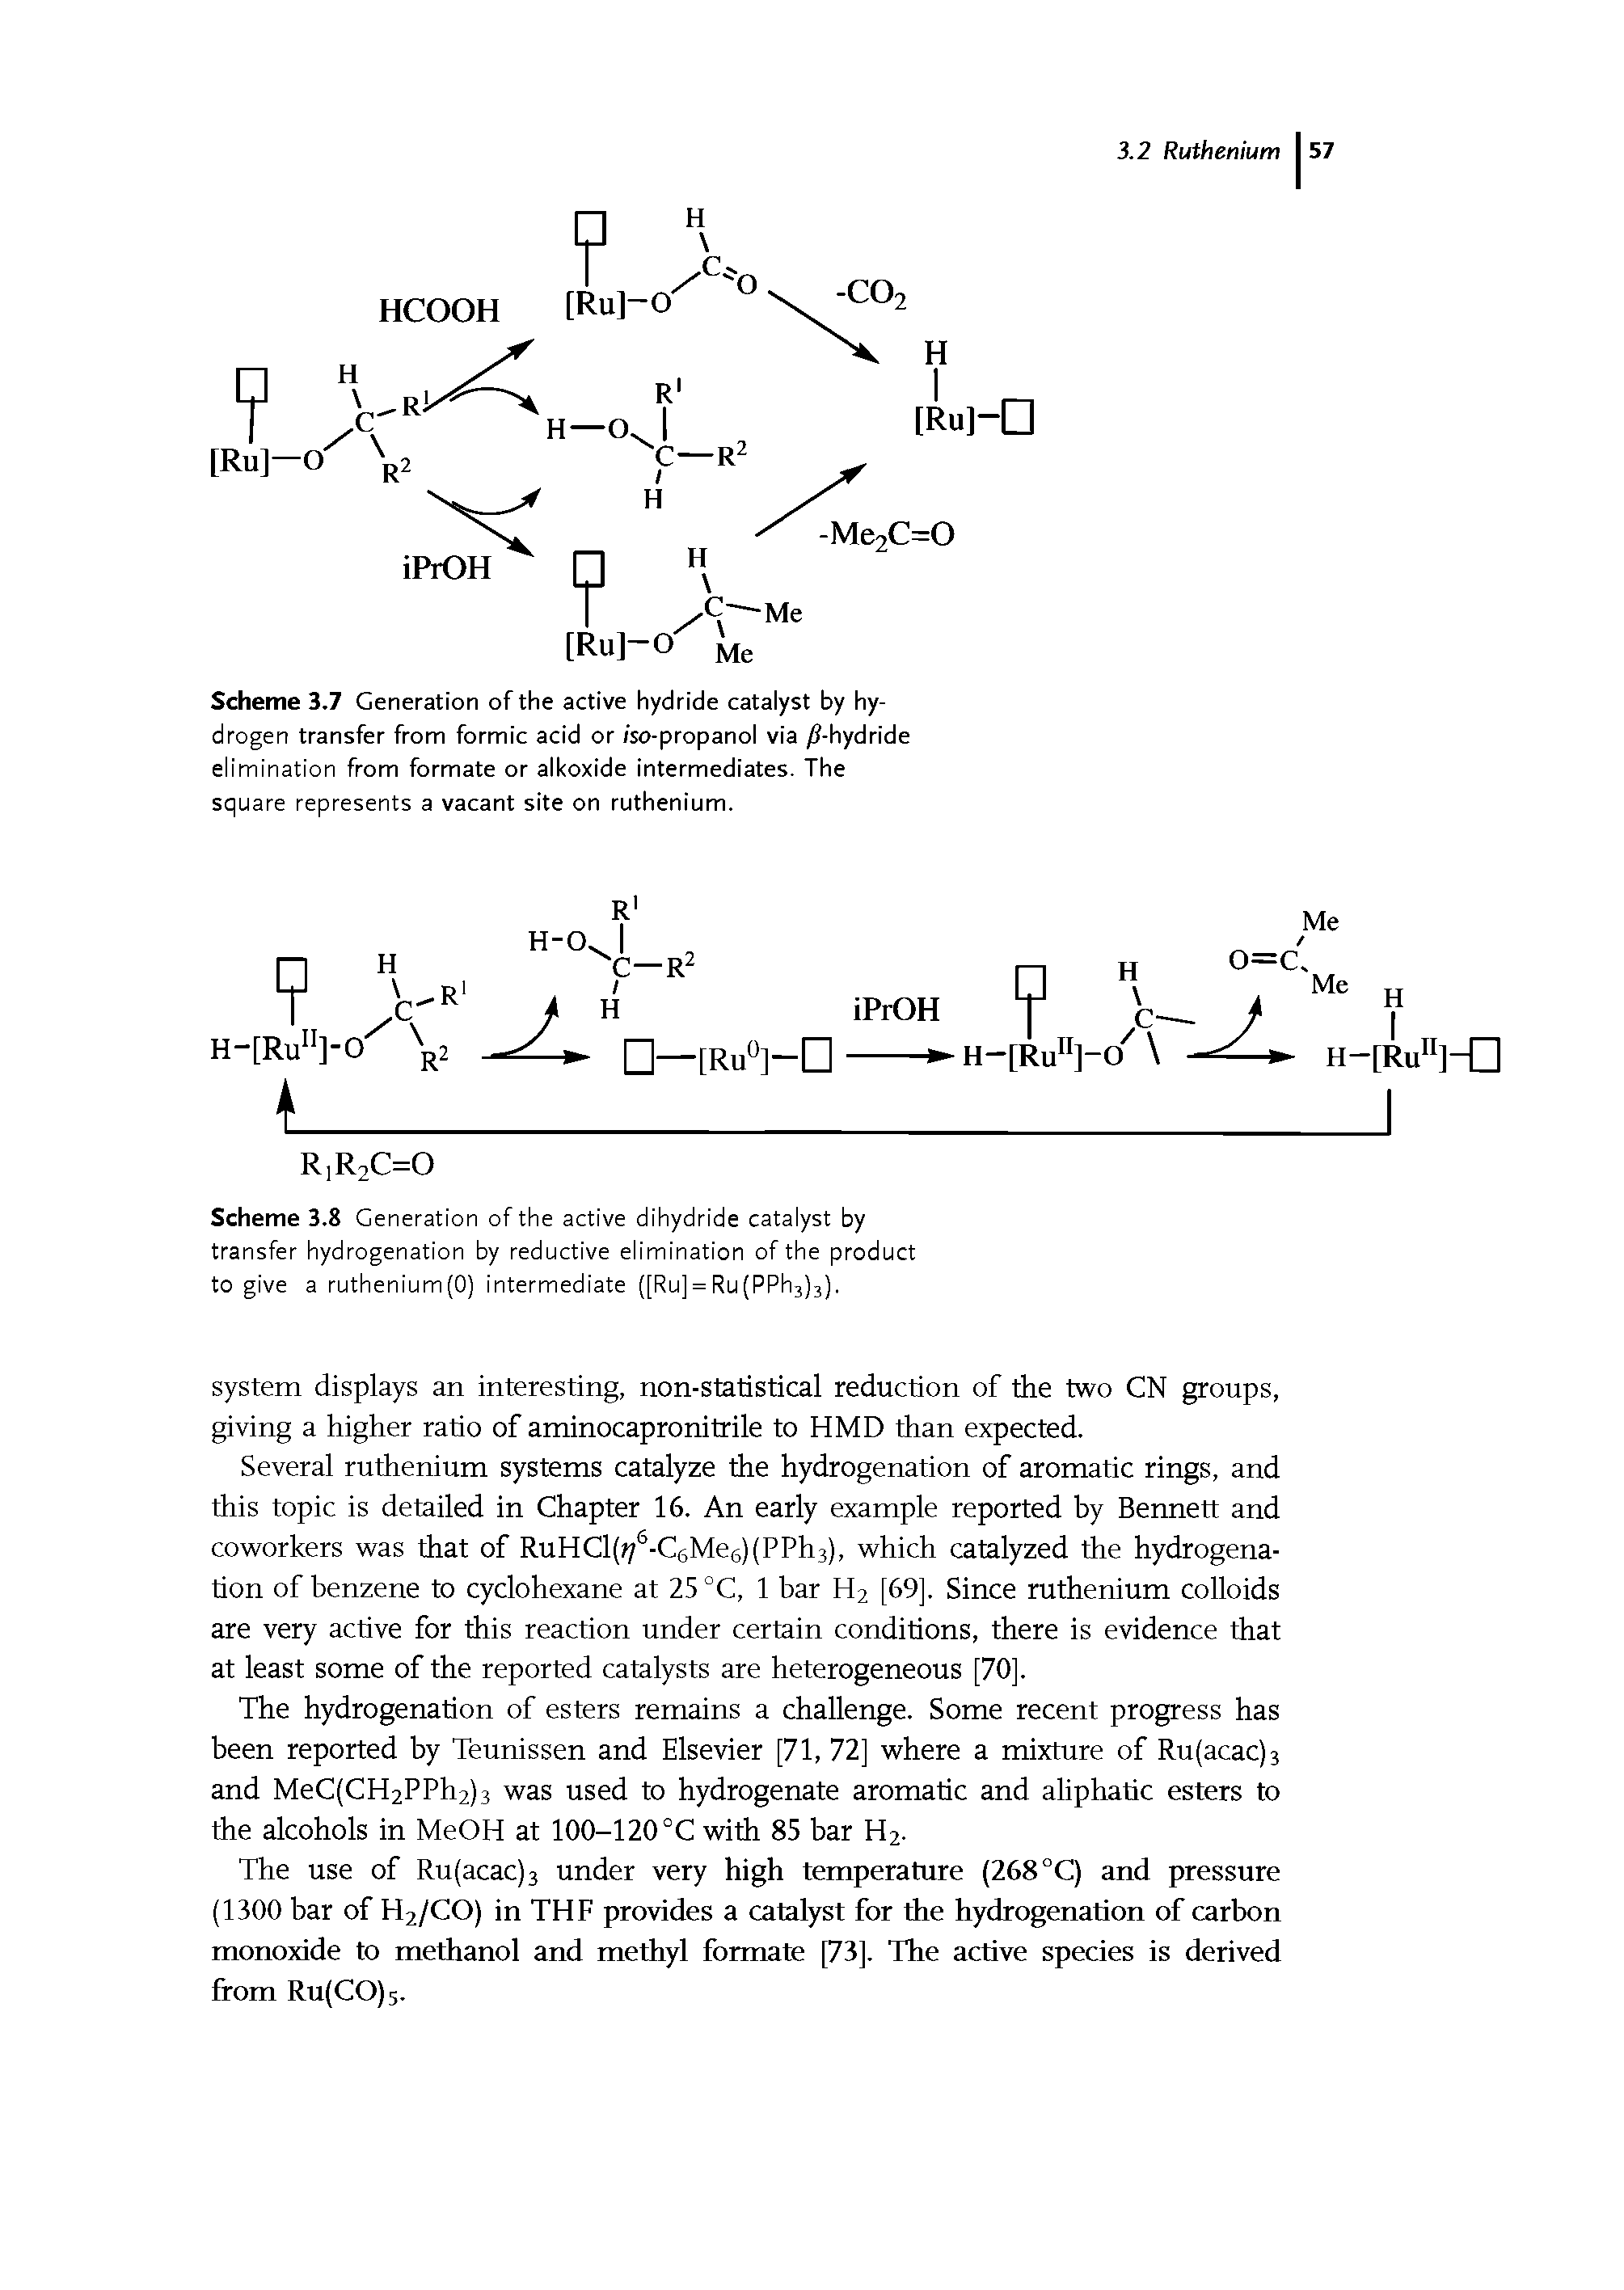 Scheme 3.8 Generation of the active dihydride catalyst by transfer hydrogenation by reductive elimination of the product to give a ruthenium(O) intermediate ([Ru] = Ru(PPh3)3).